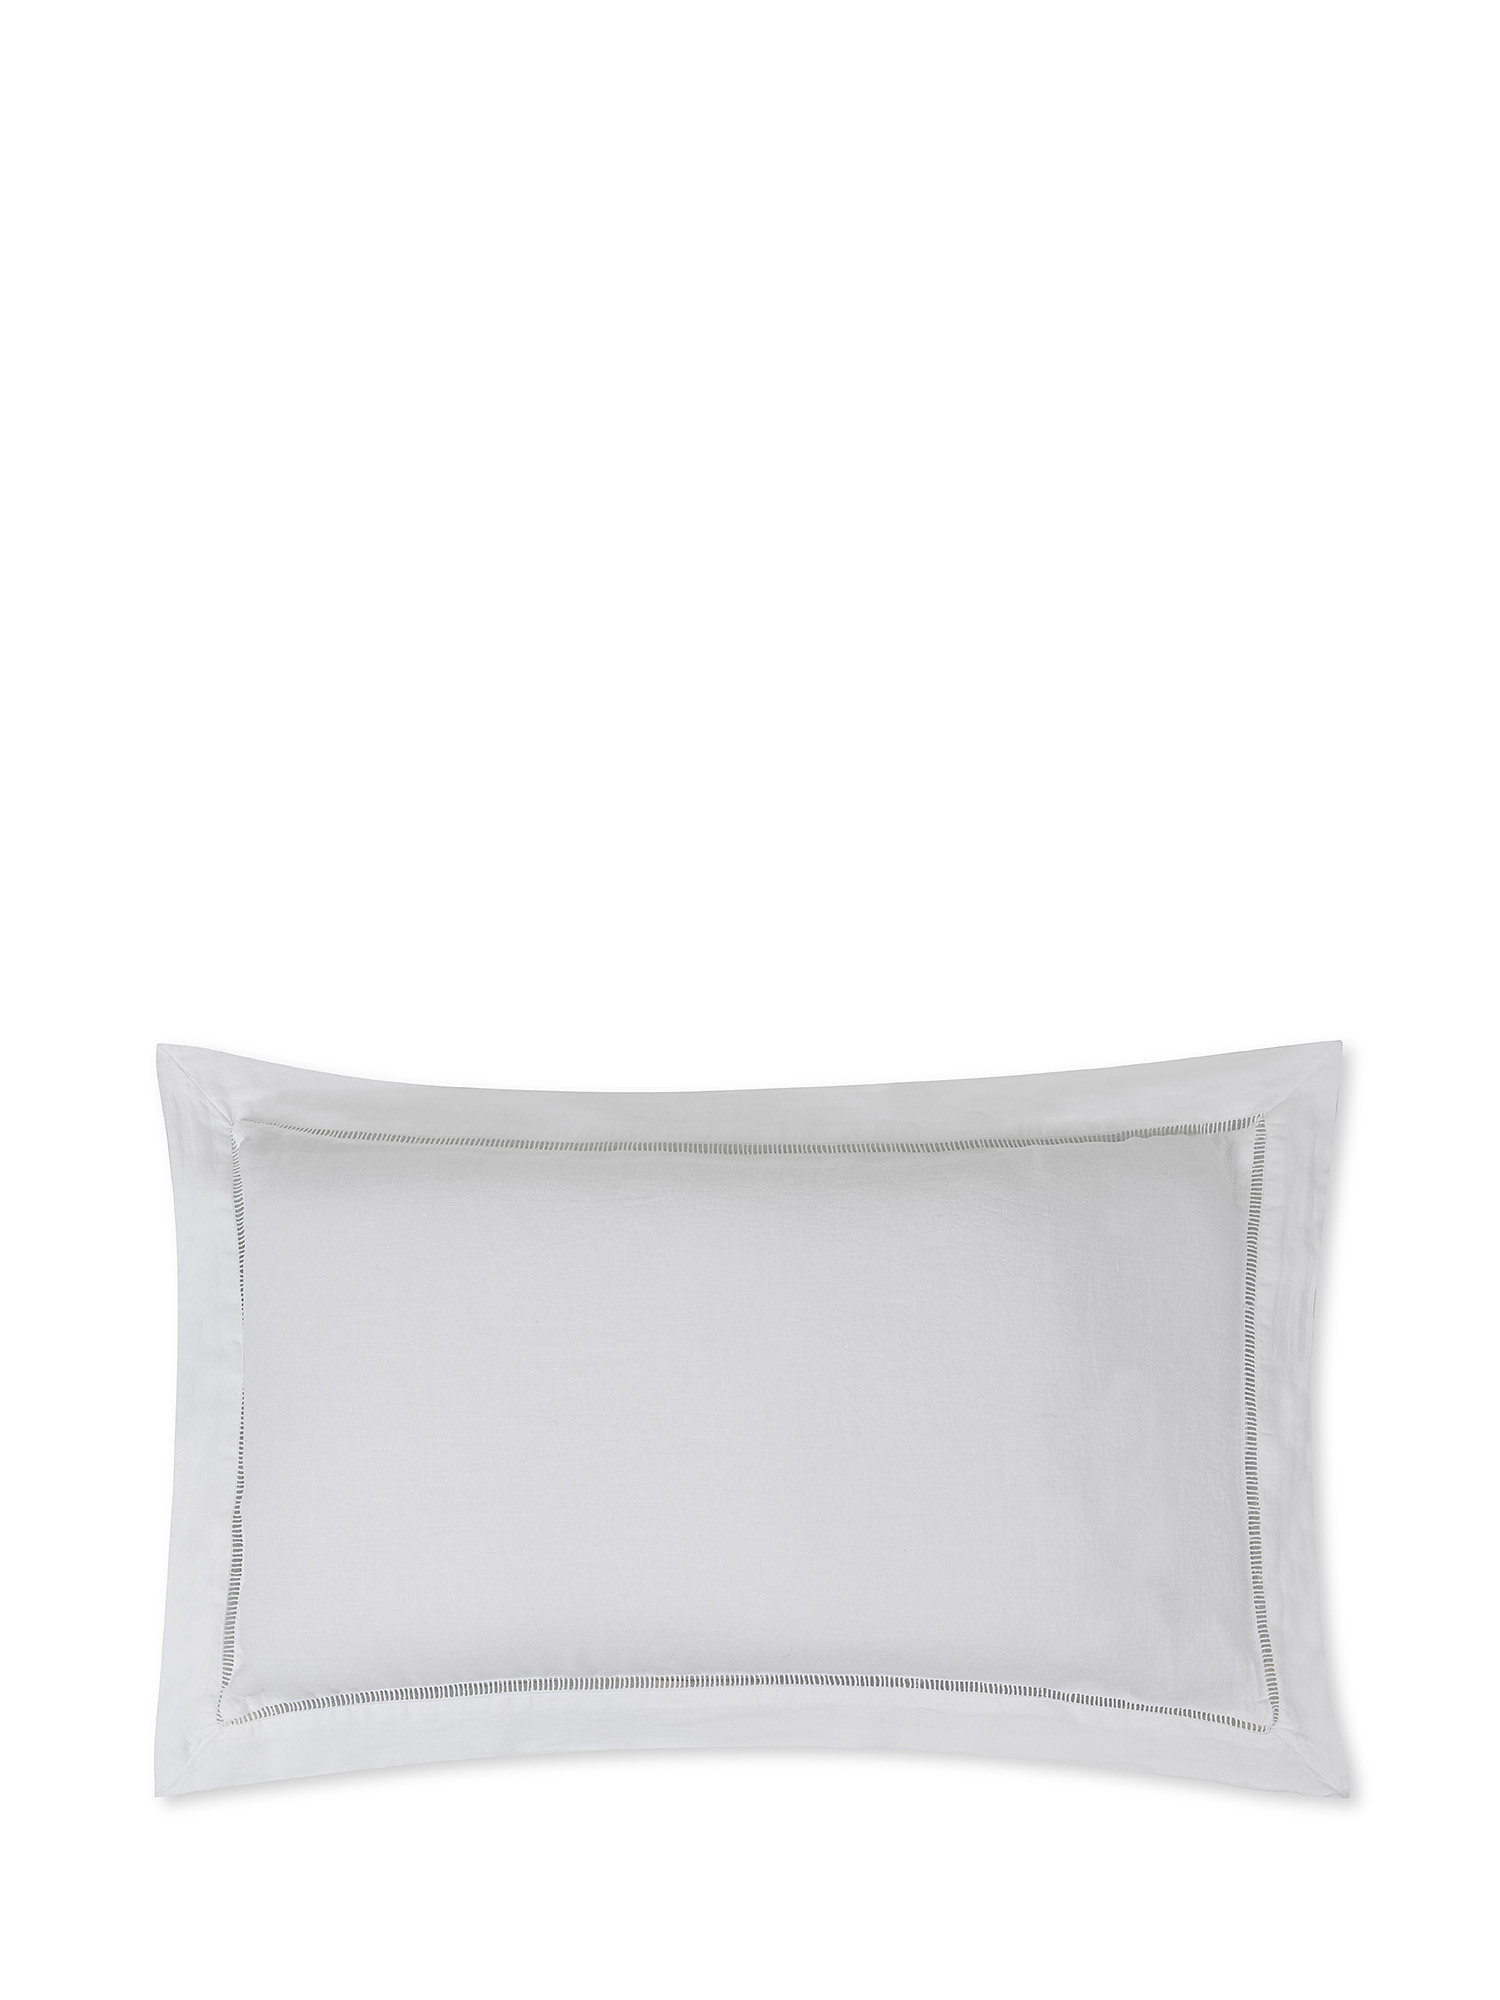 Portofino pillowcase in pure linen with a-jour hem, White, large image number 0